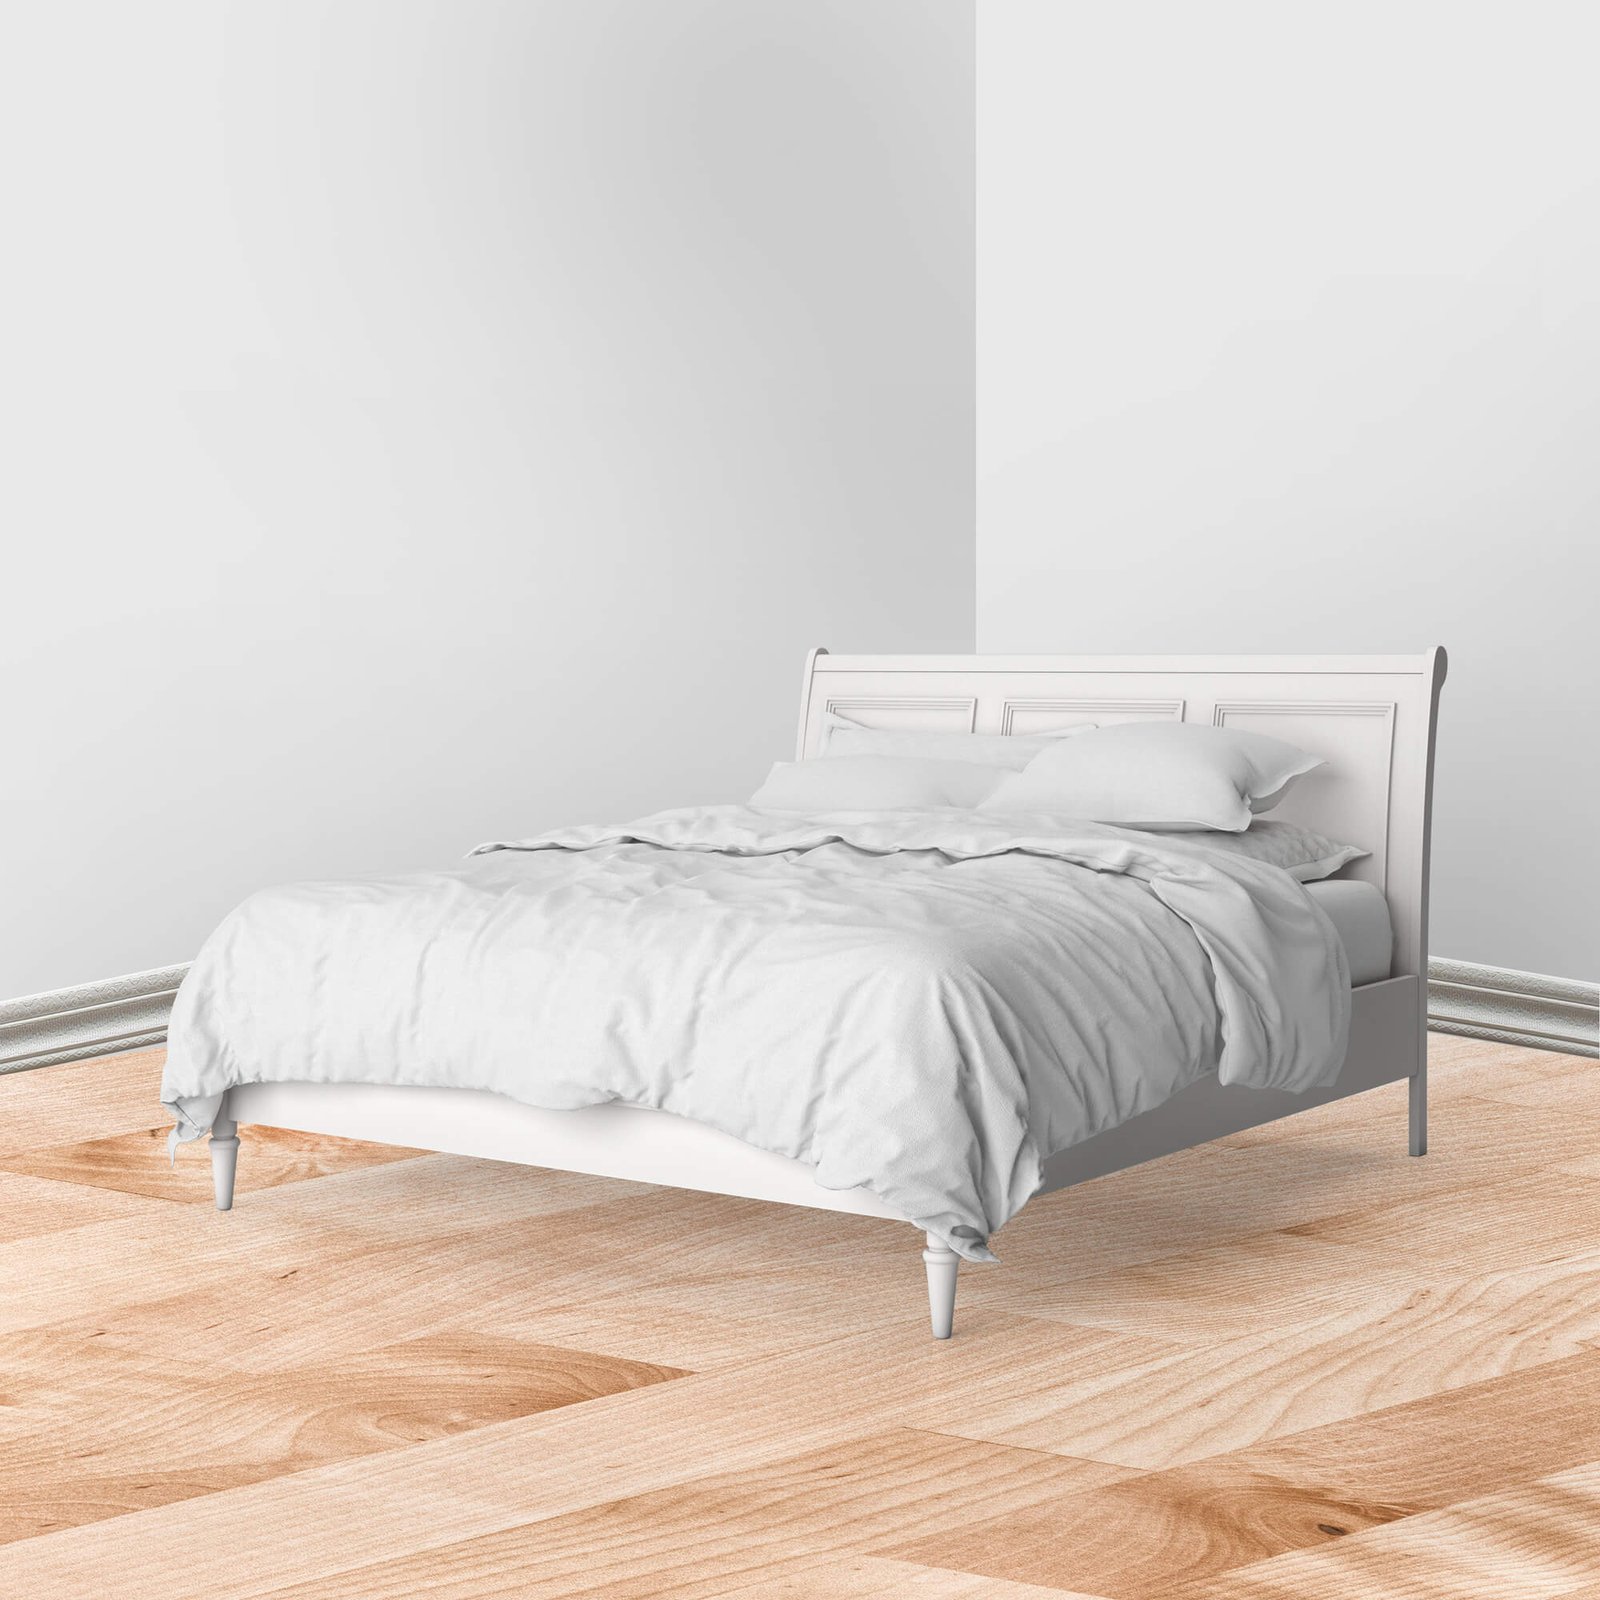 Blank Free Bed Linen Mockup PSD Template